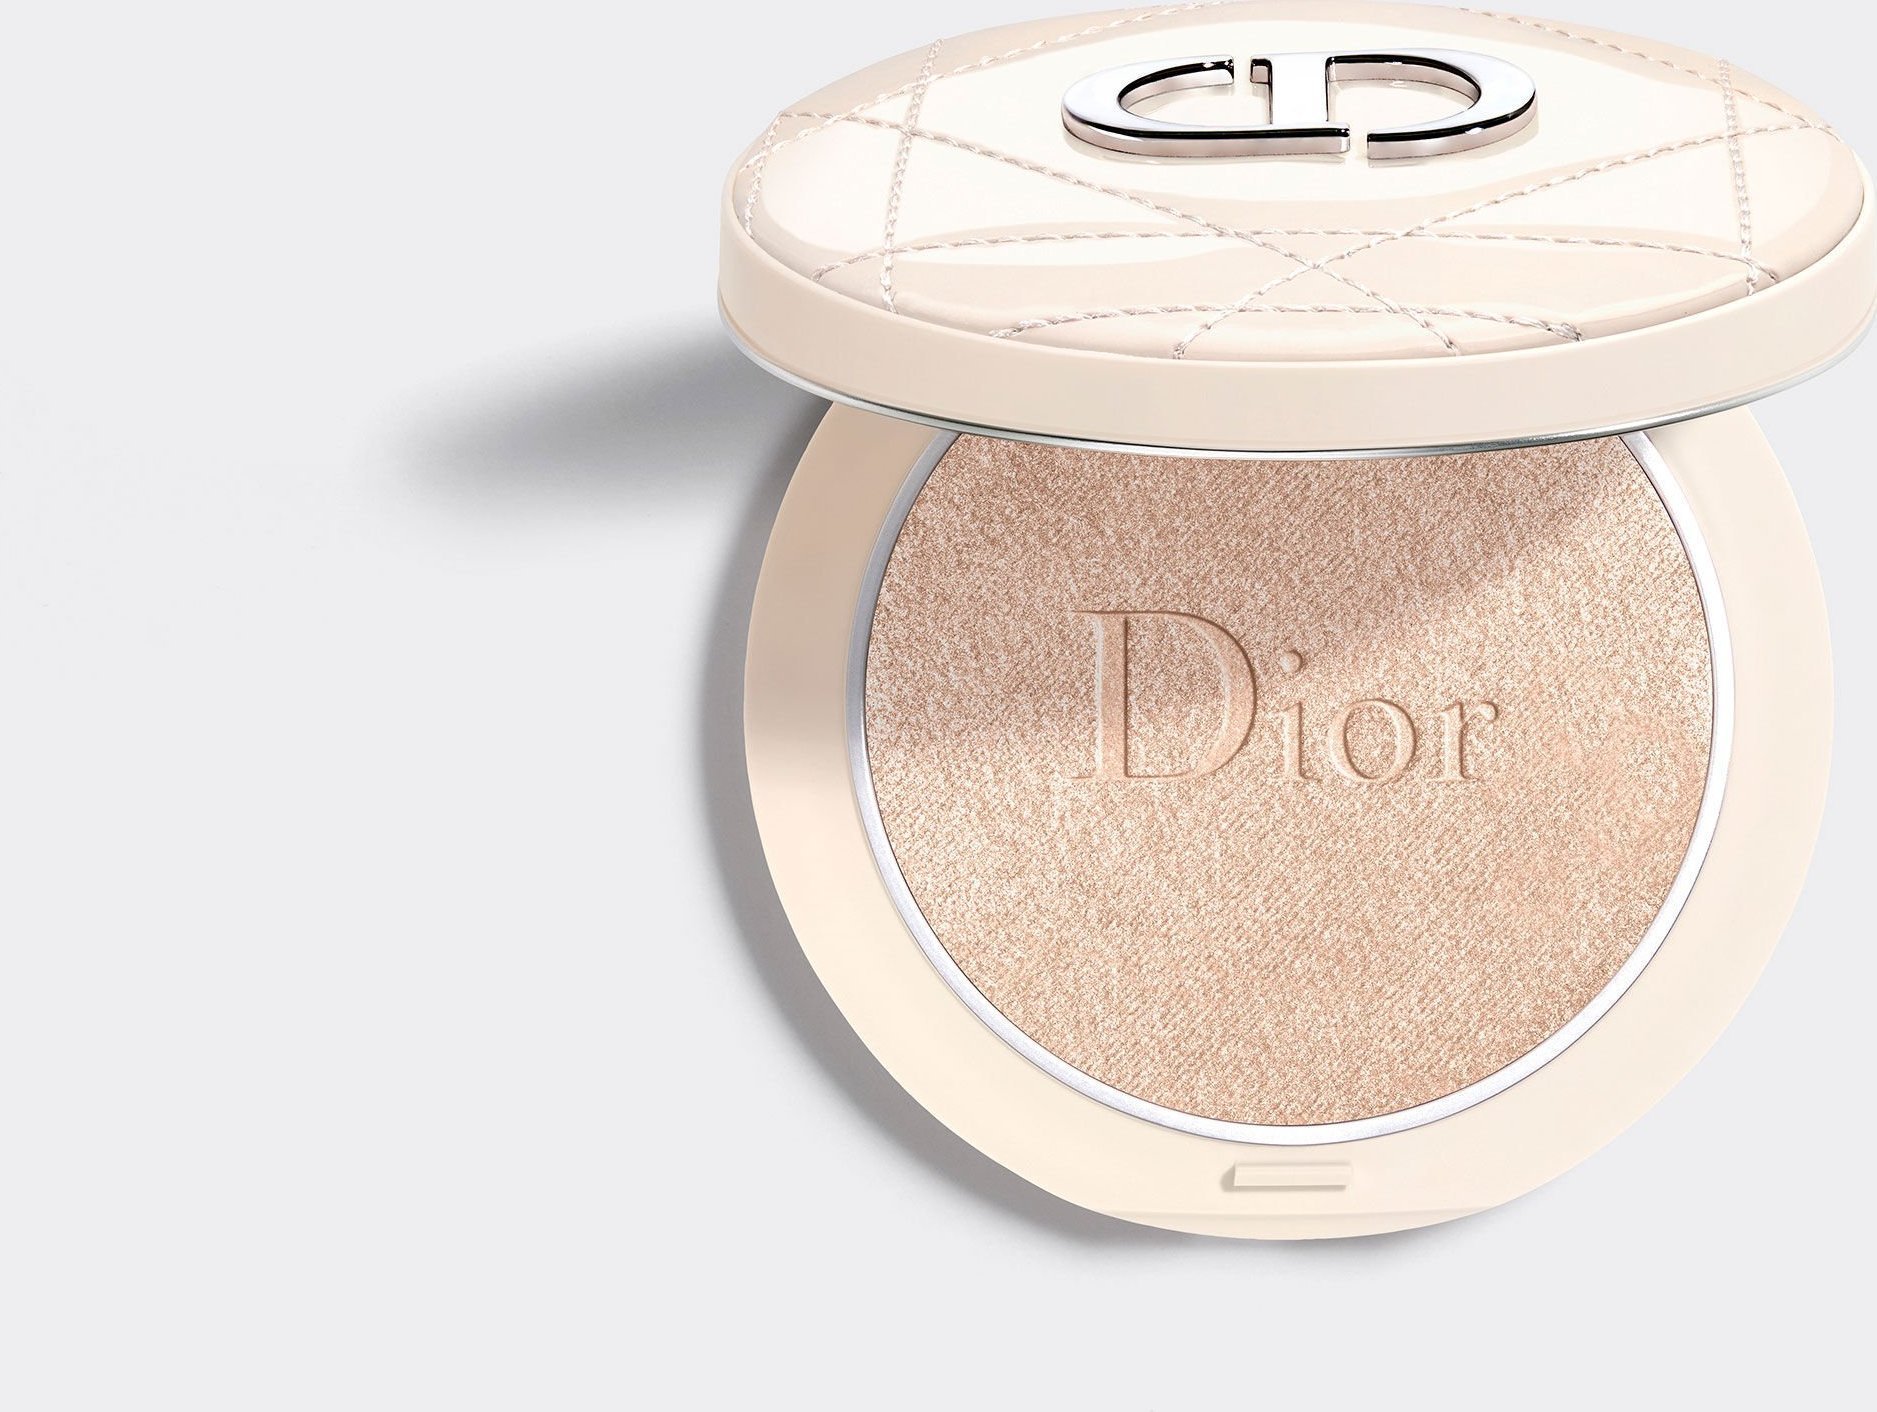 Dior Forever Couture Luminizer Highlighting Powder ,01 NUDE GLOW, 6g